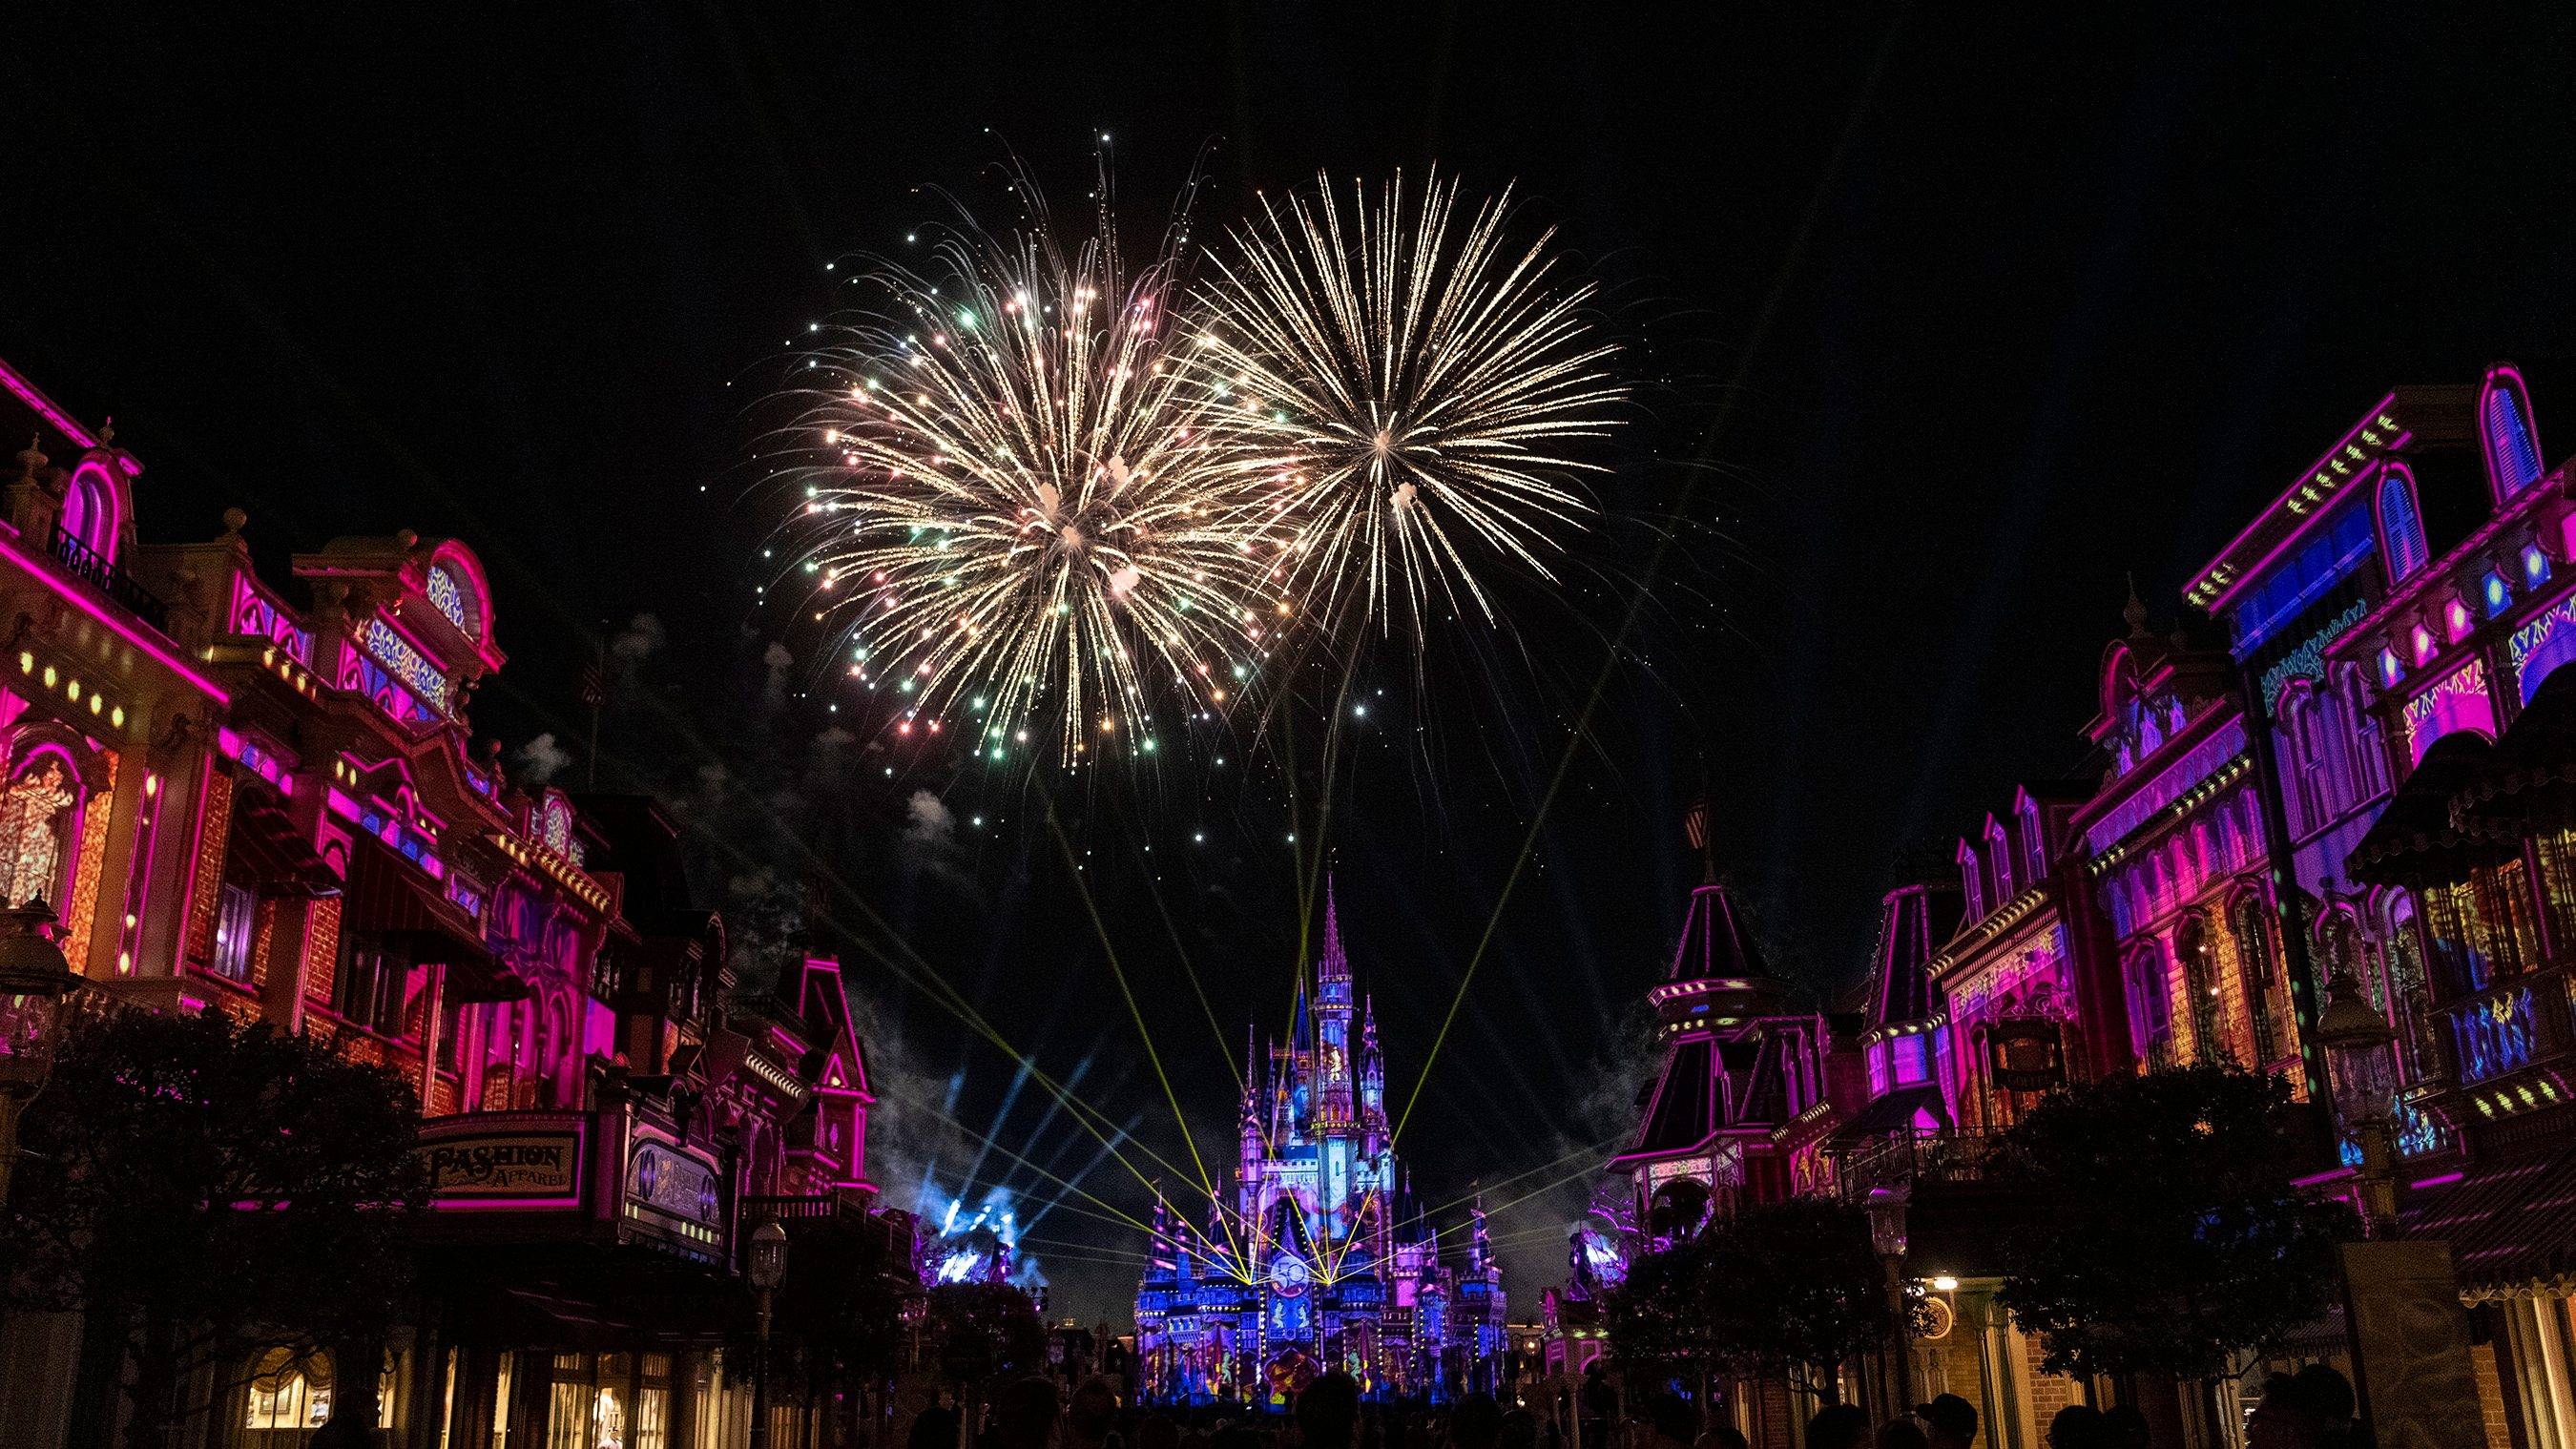 A look at the new Main Street U.S.A. projections added to Magic Kingdom's Happily Ever After firework spectacular